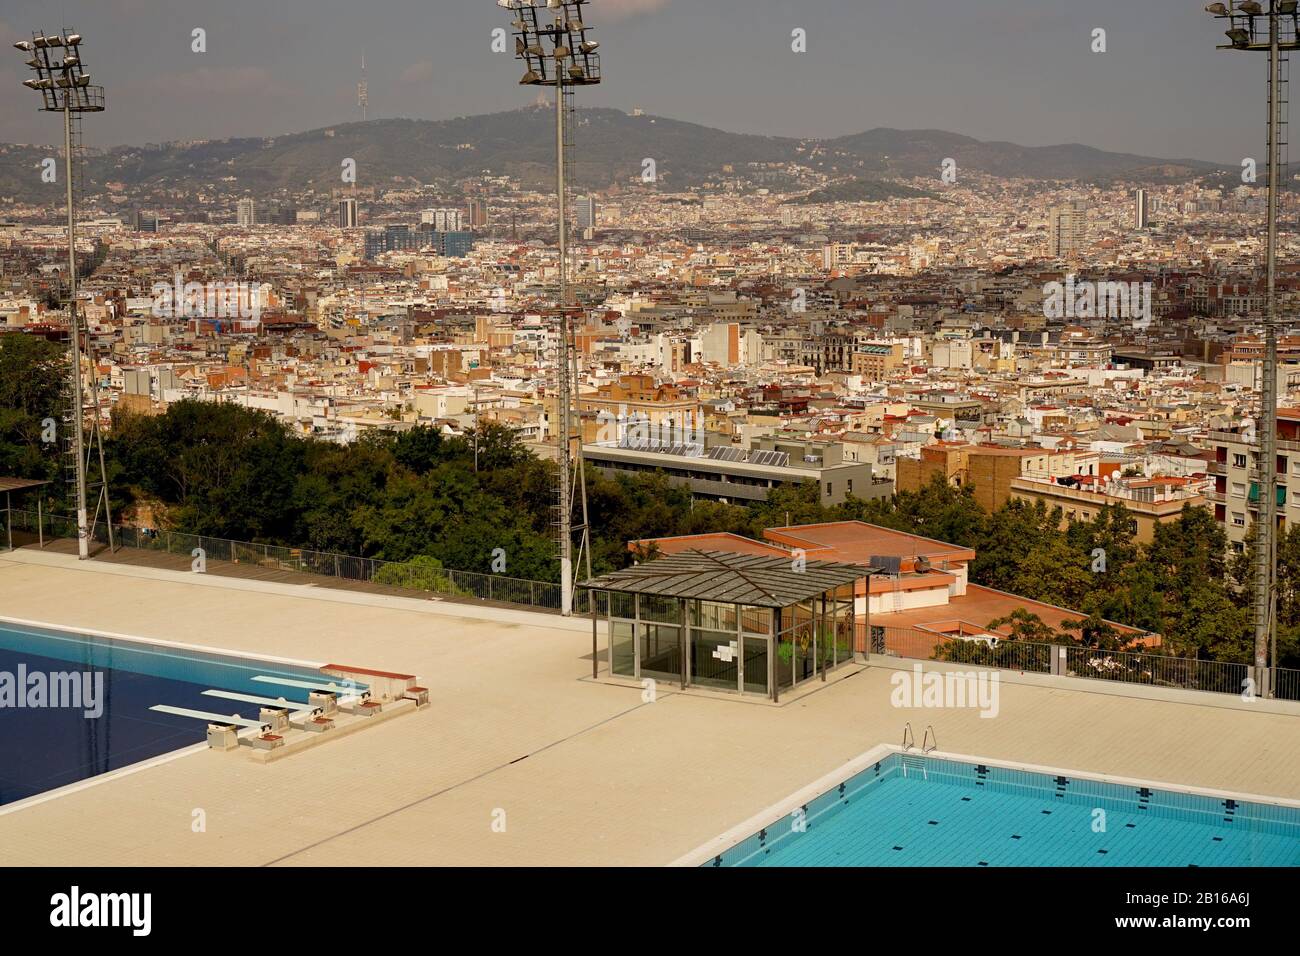 Empty outdoor swimming pool with Barcelona city in the background Stock Photo